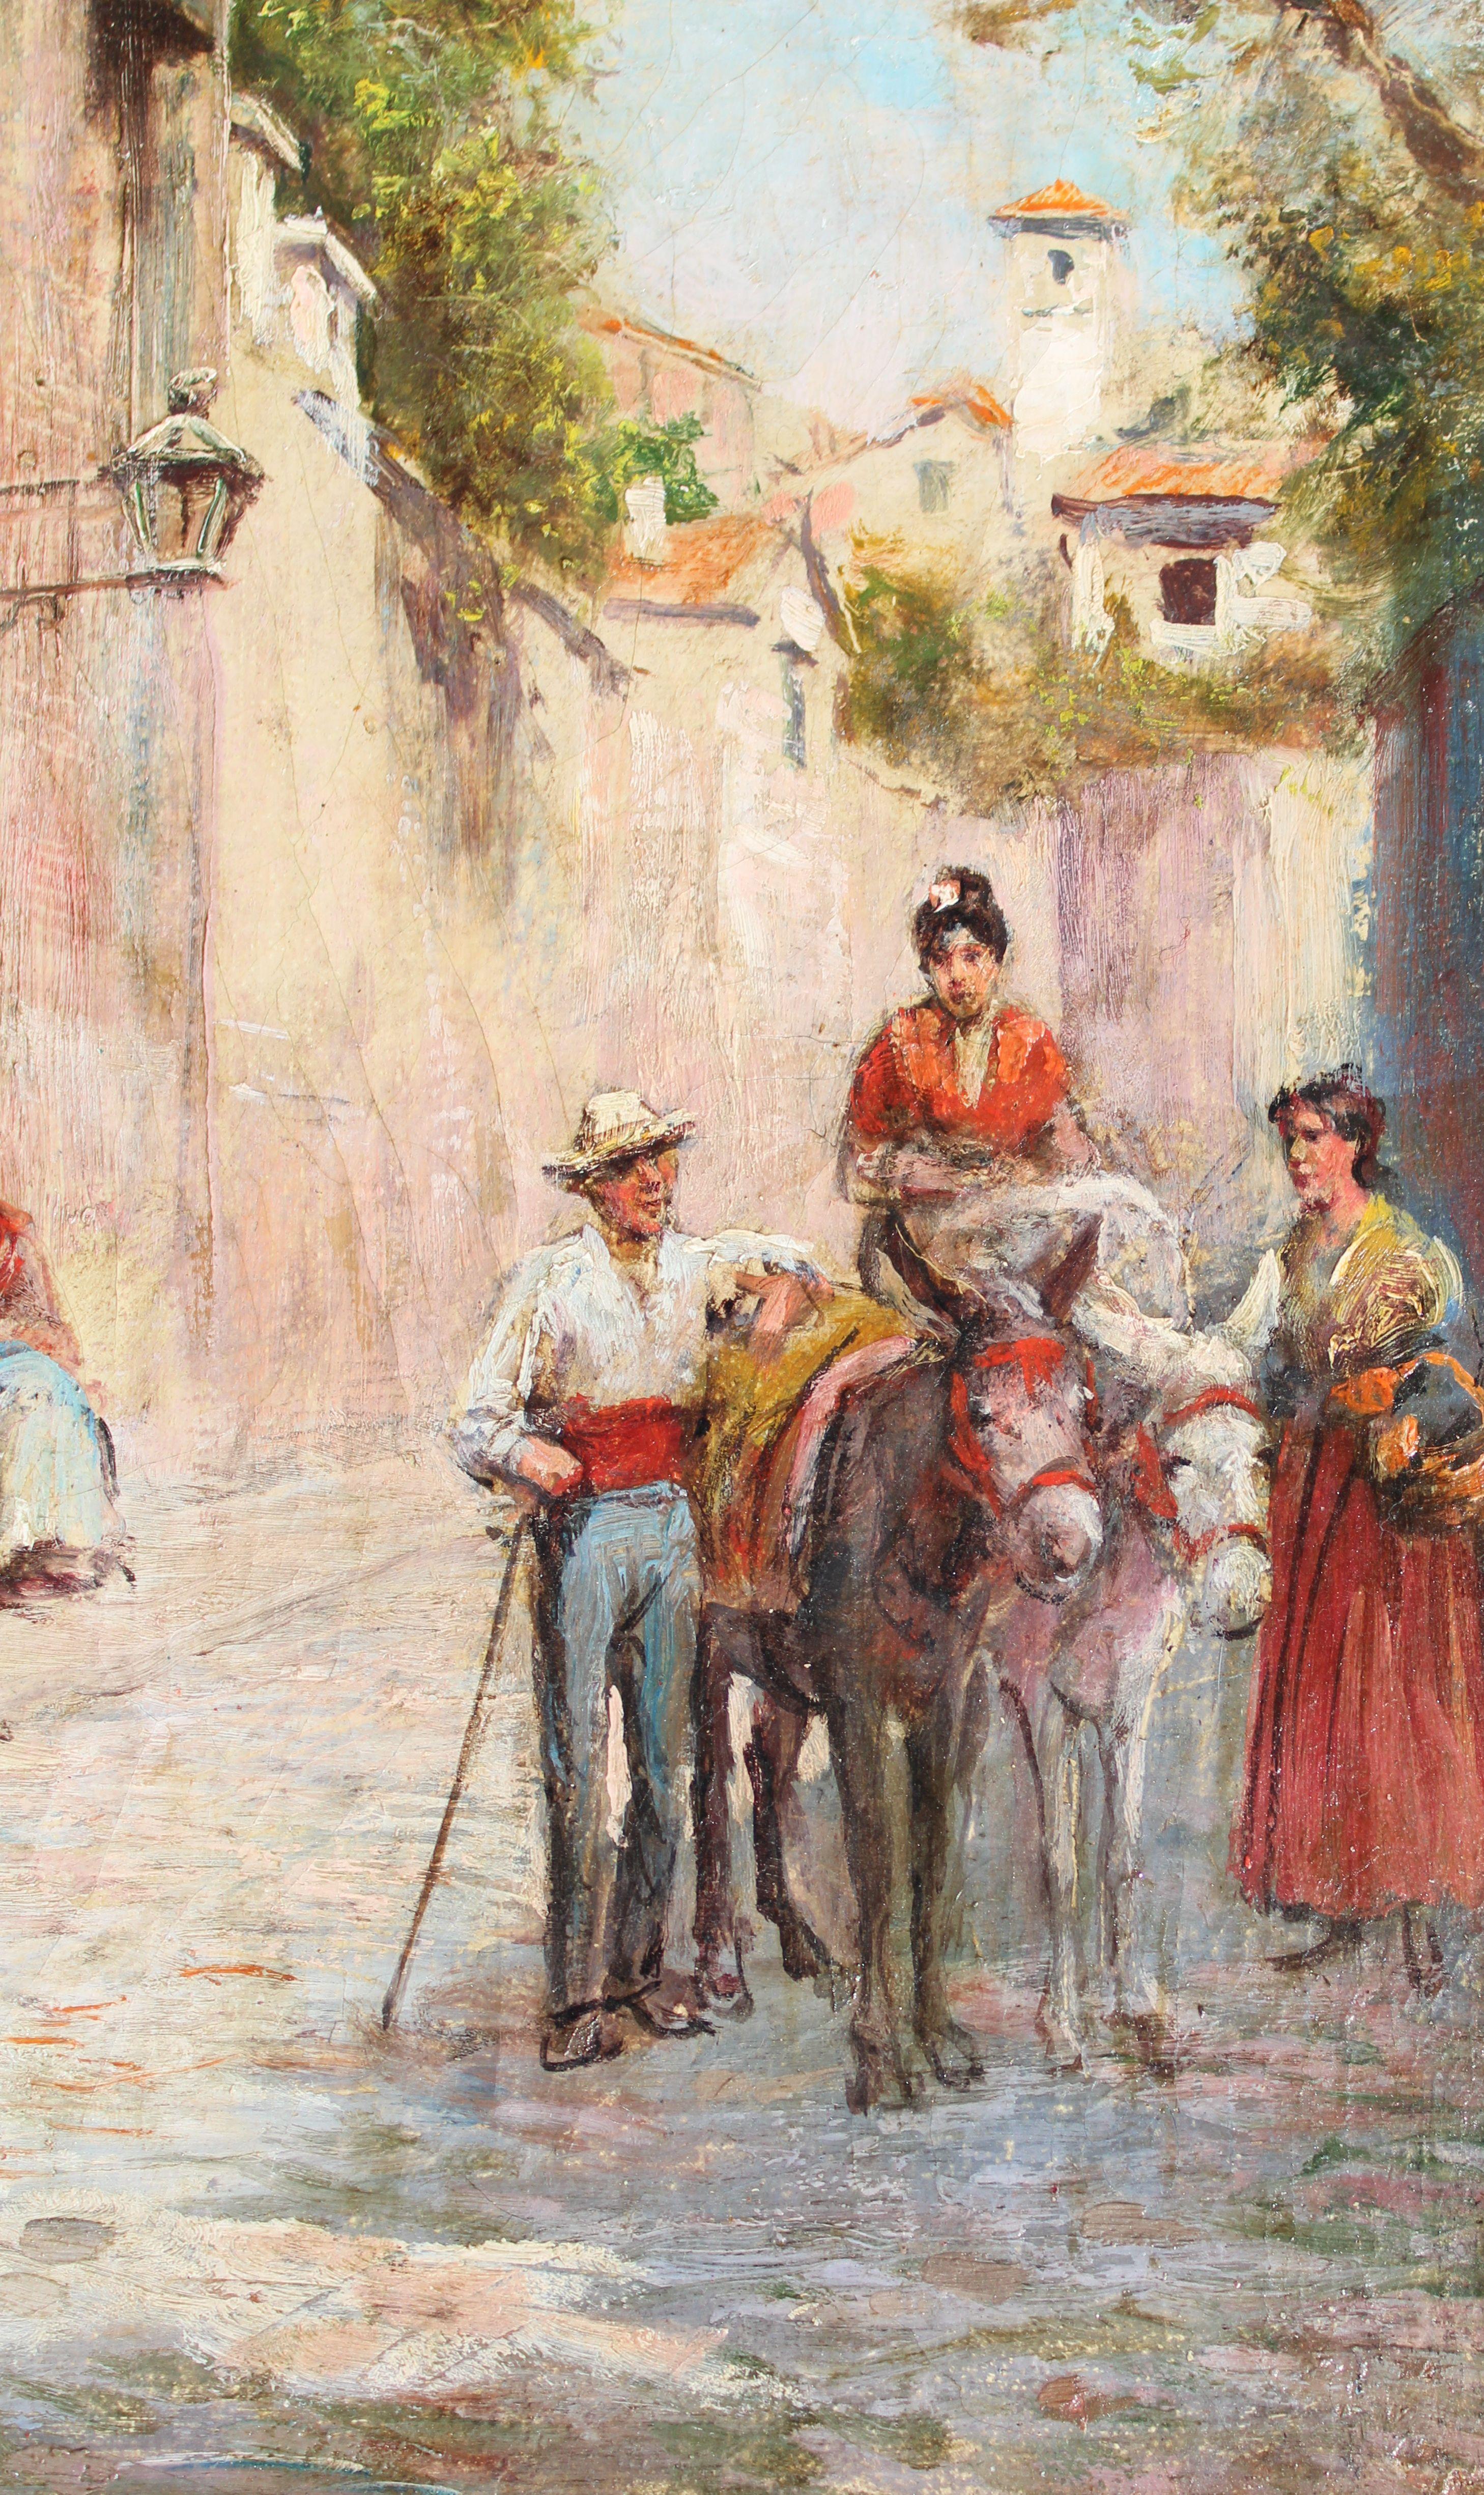 Figures with donkeys, Italy  Oil on canvas, 45.7x35.6 cm 9